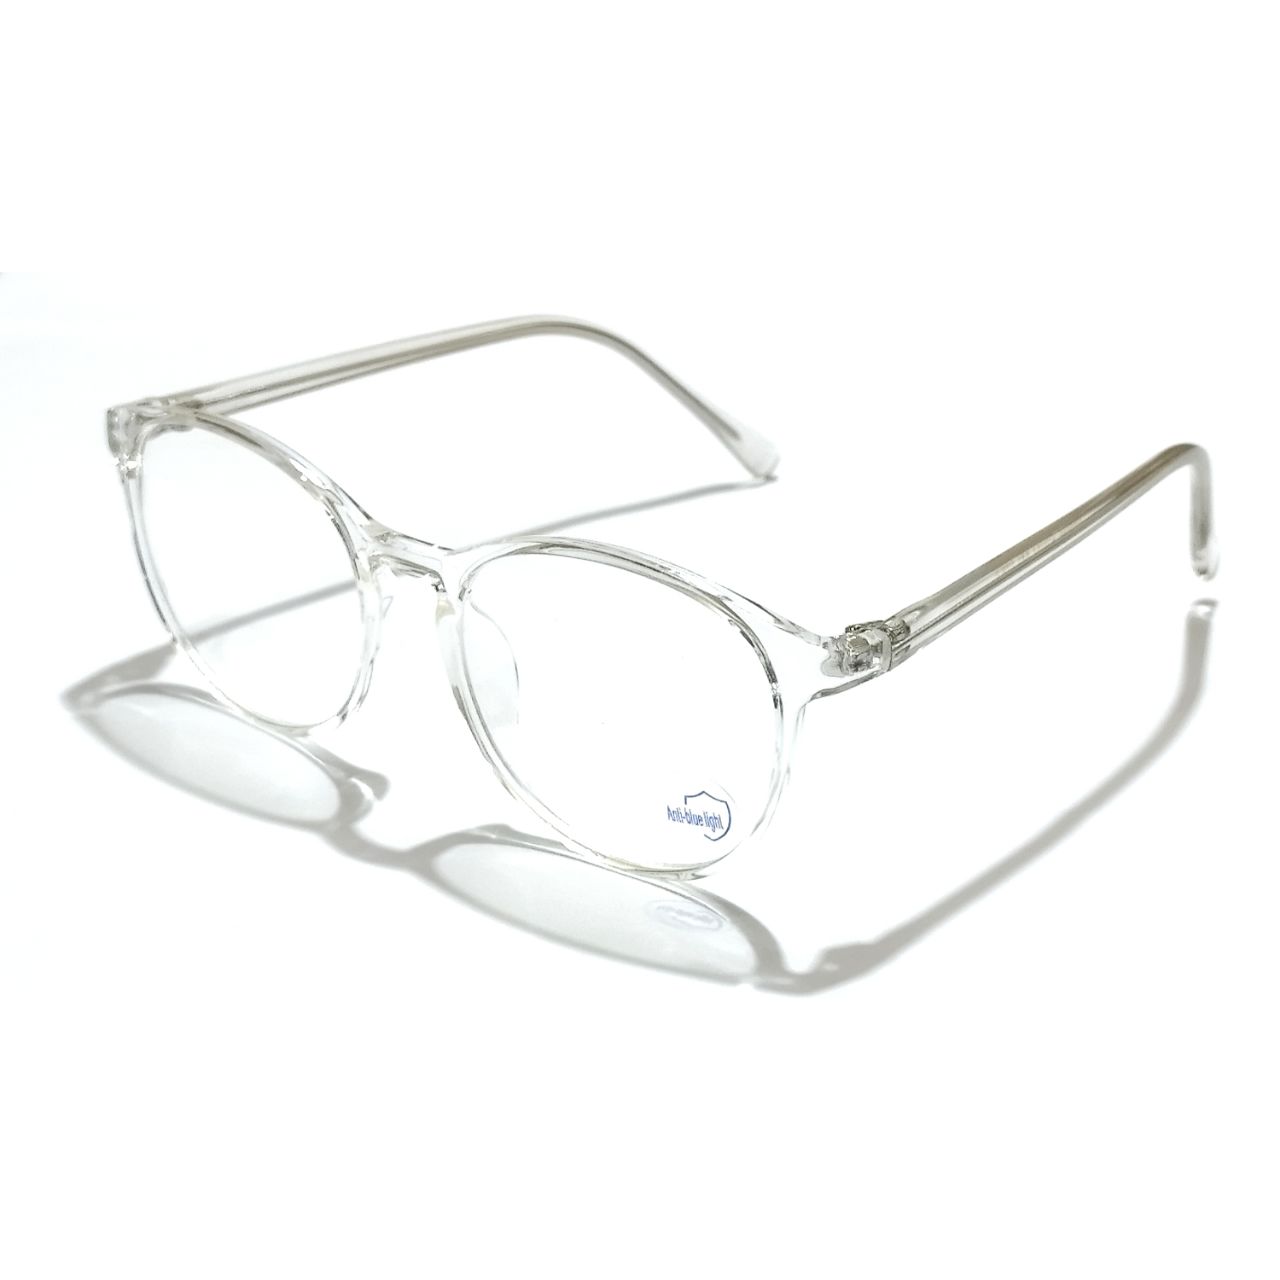 Luxury Clear Round Transparent Glasses for Men and Women M8555 C6